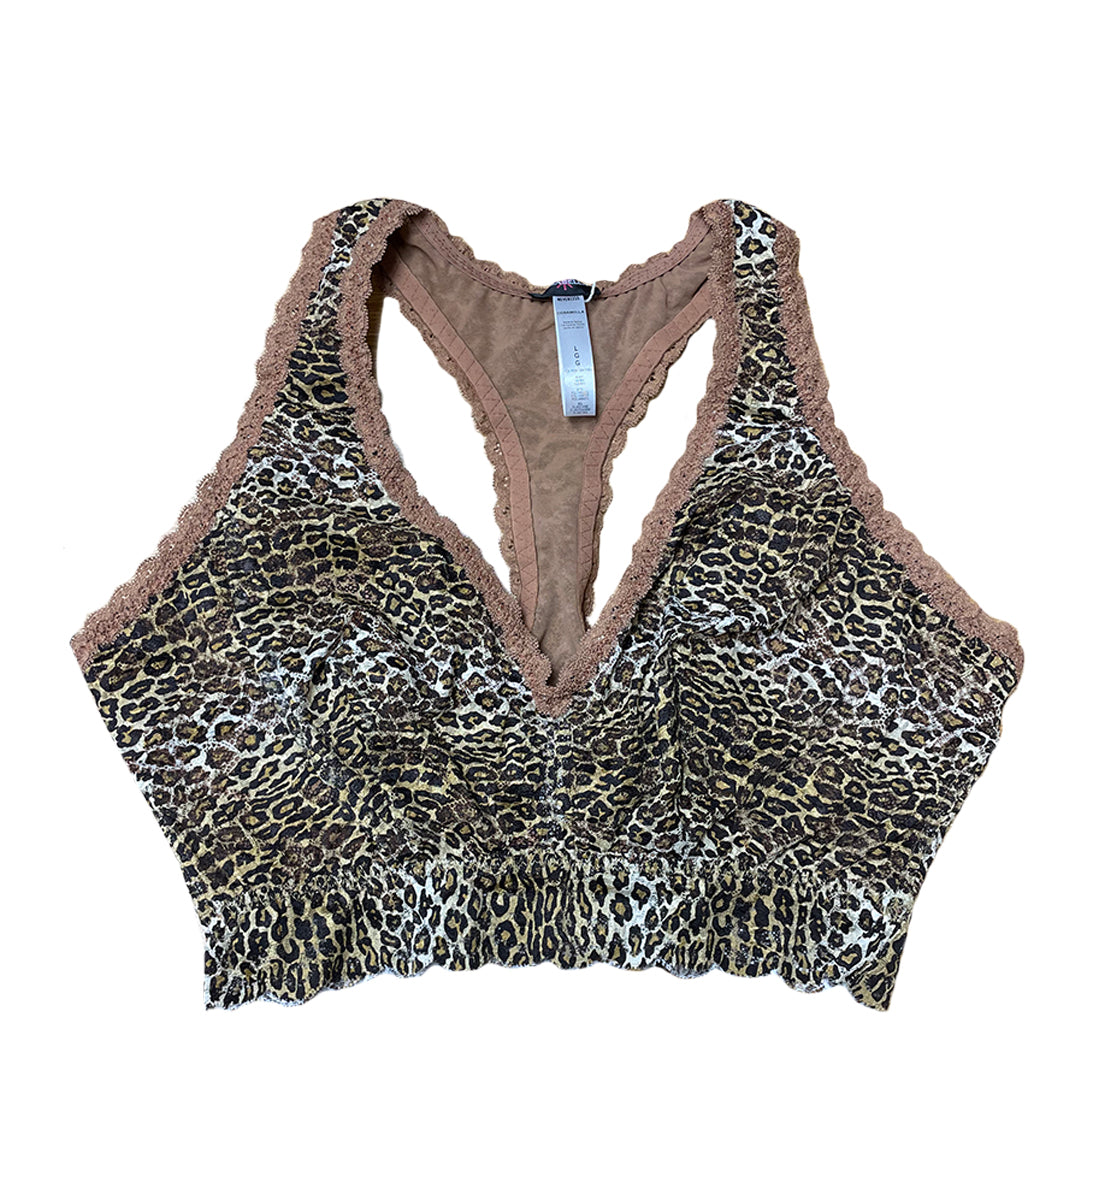 Cosabella Never Say Never Printed CURVY Racie Racerback Bralette (NEVEP1355),XS,Neutral Leopard - Neutral Leopard,XS